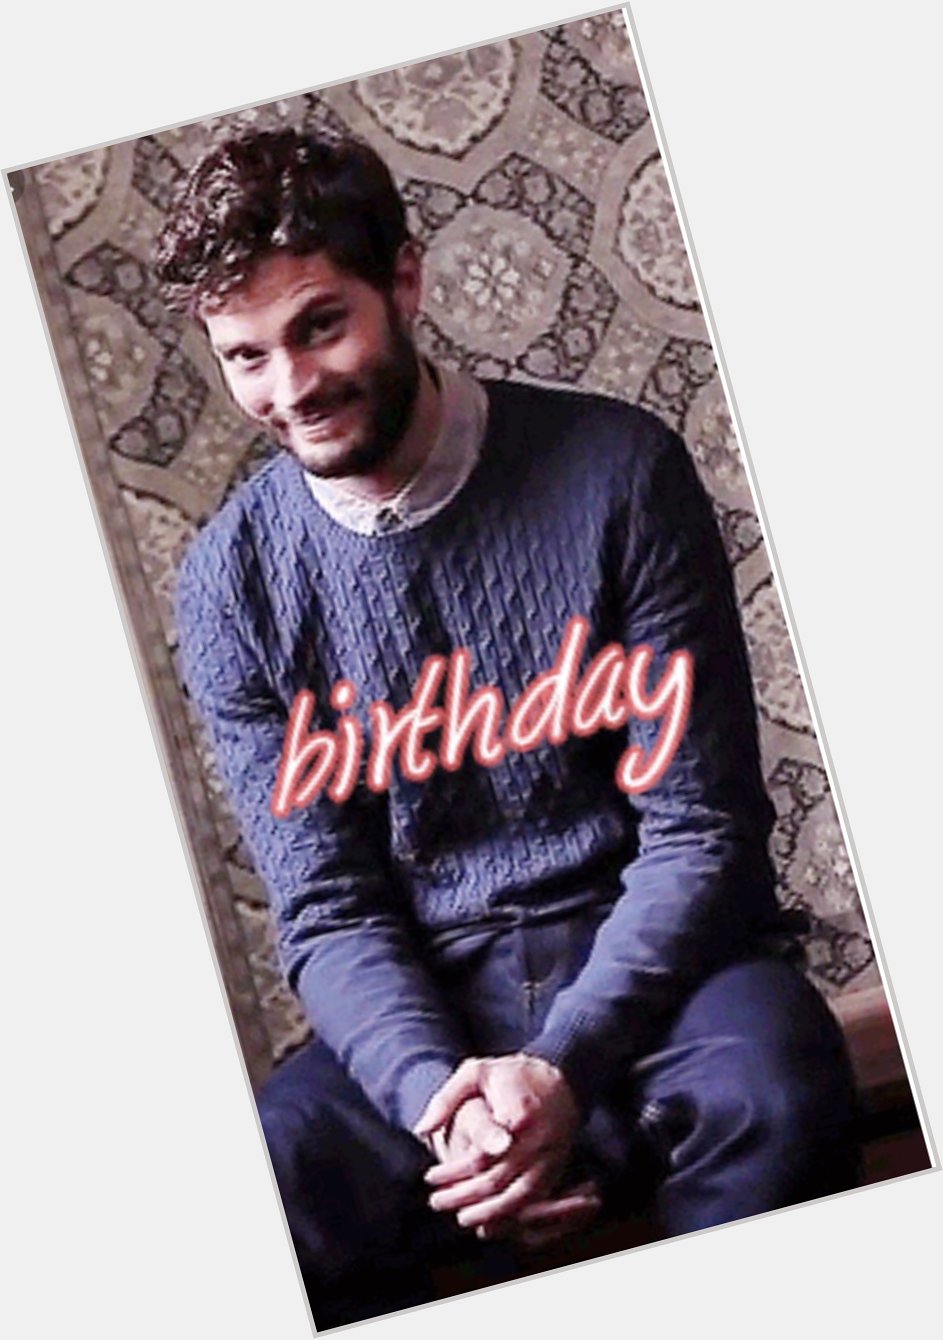  Happy birthday Amelia Warner hope your day has been blessed and u have many more     